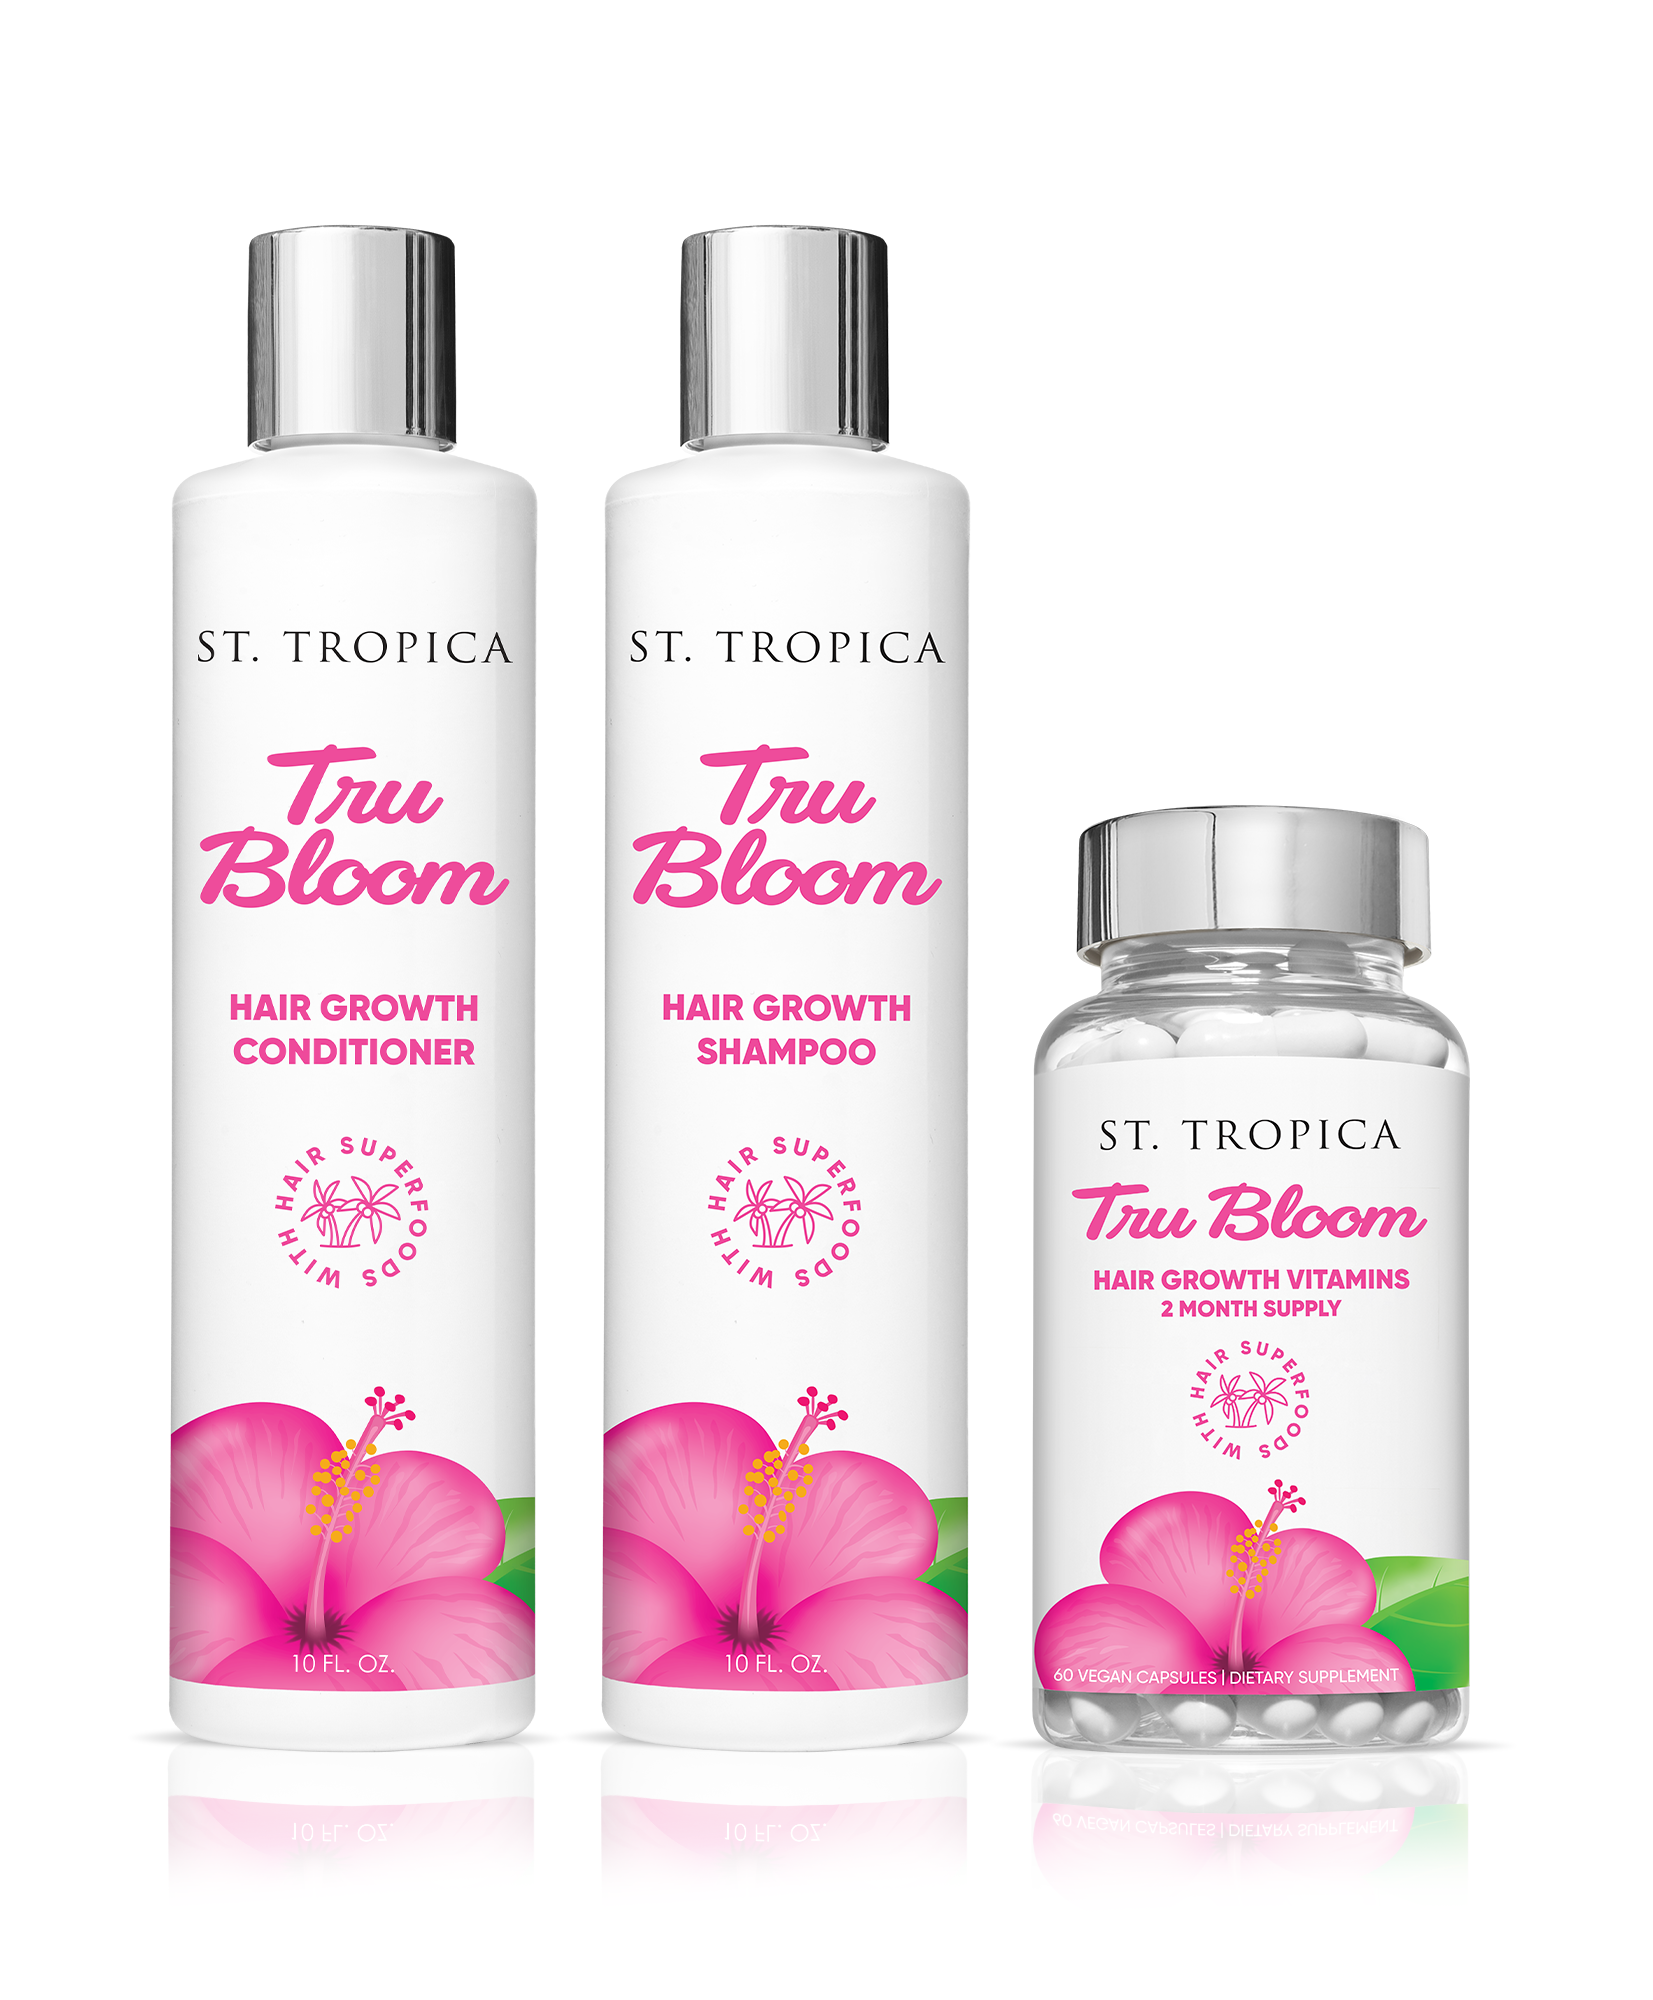 ST. TROPICA Bloom 3-Step Hair Growth System